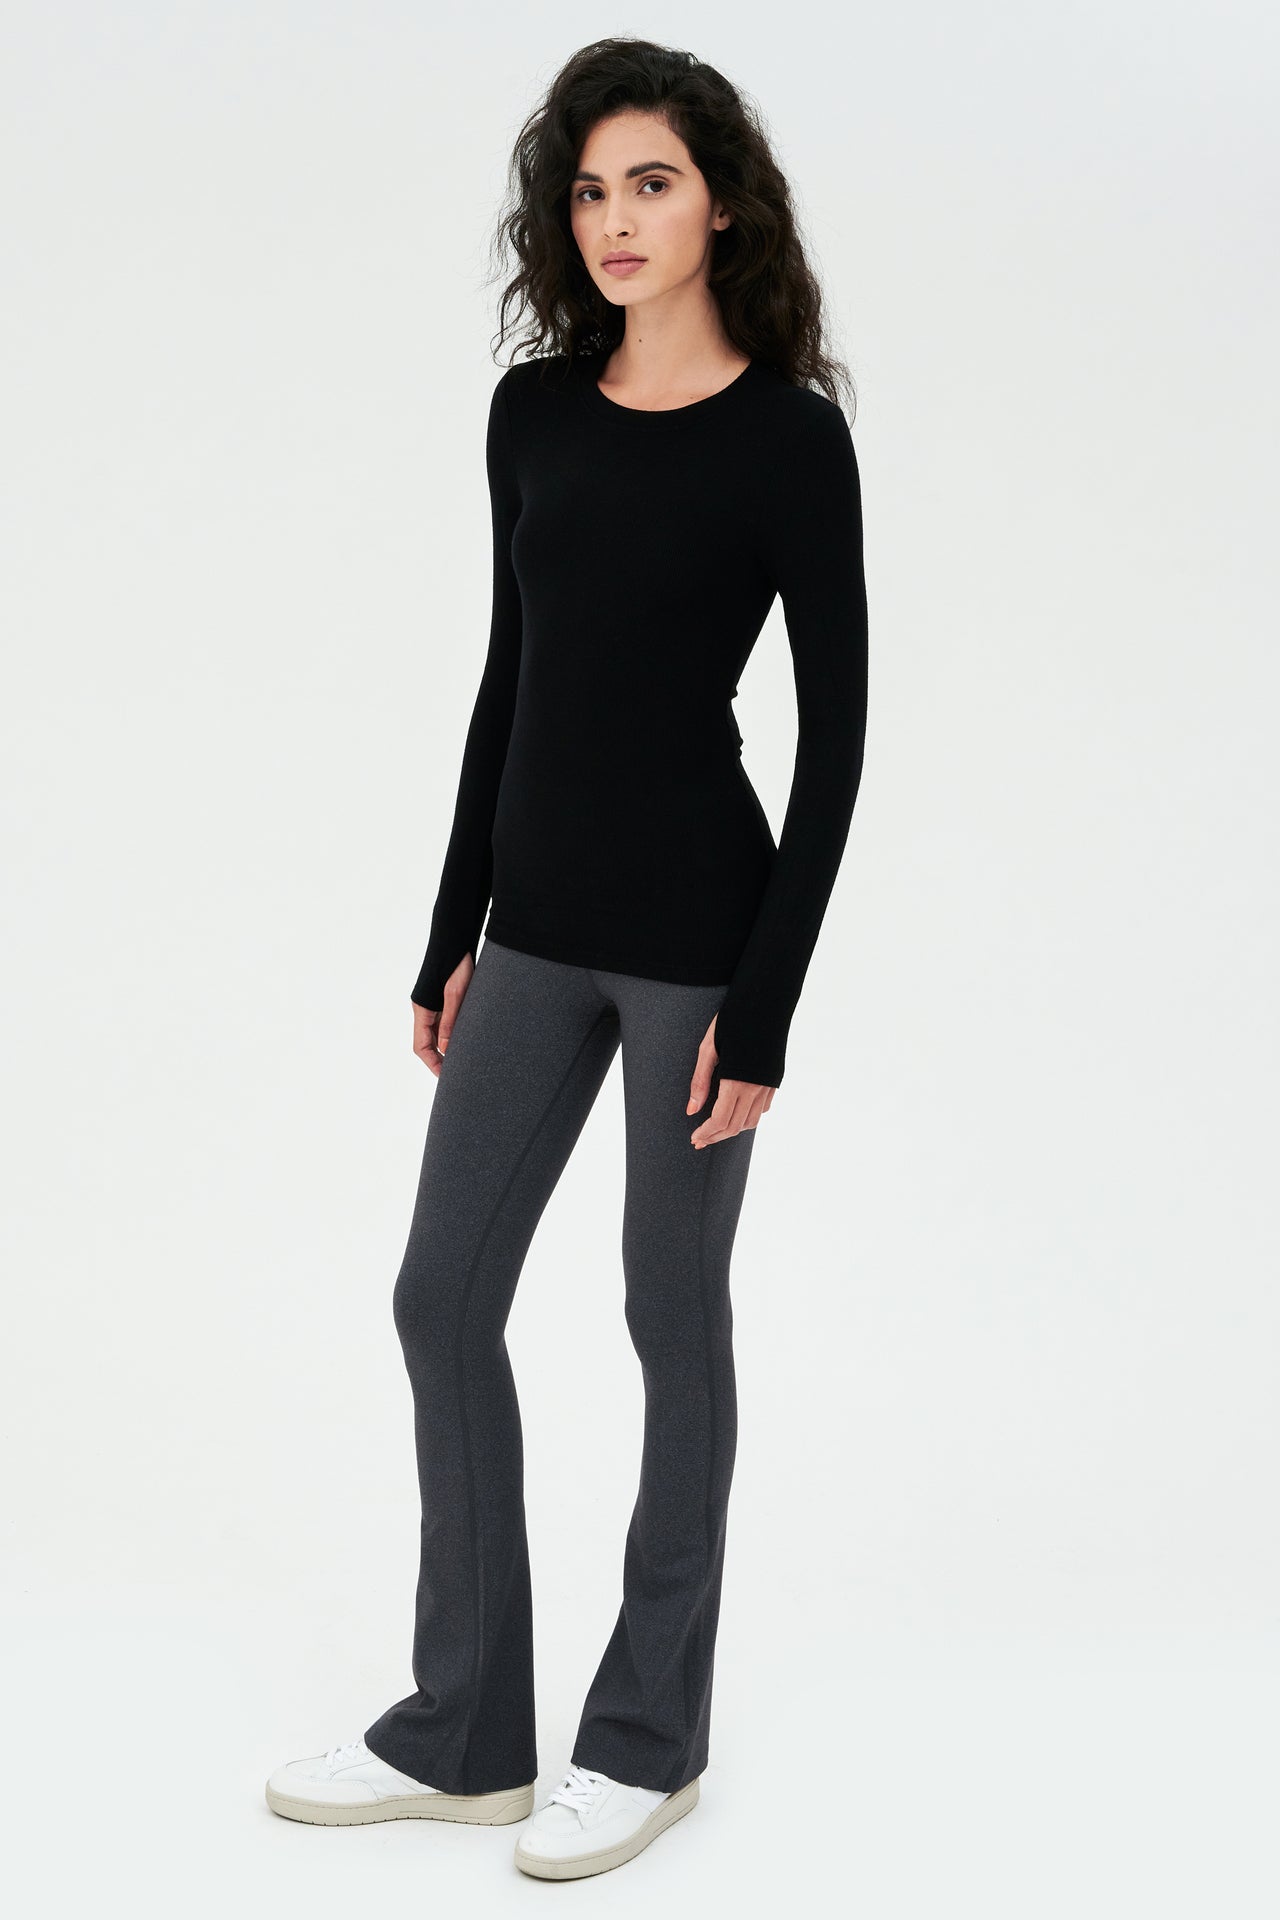 A woman wearing a SPLITS59 Louise Rib Long Sleeve in Black, perfect for gym workouts, and grey leggings.